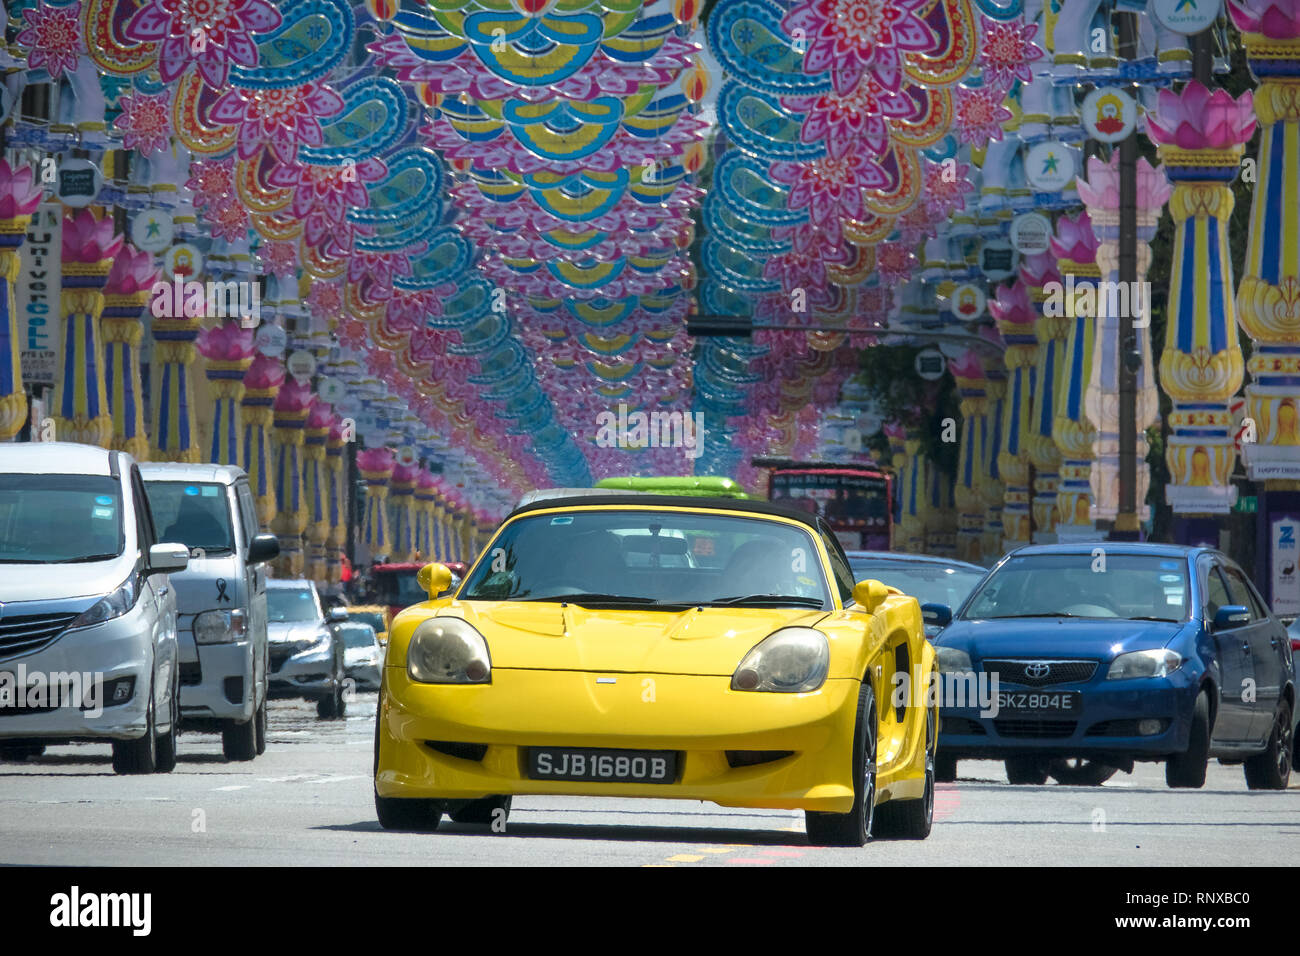 Sporty Yellow Car in traffic under Deepavali Festival Decorations - Little India, Singapore Stock Photo